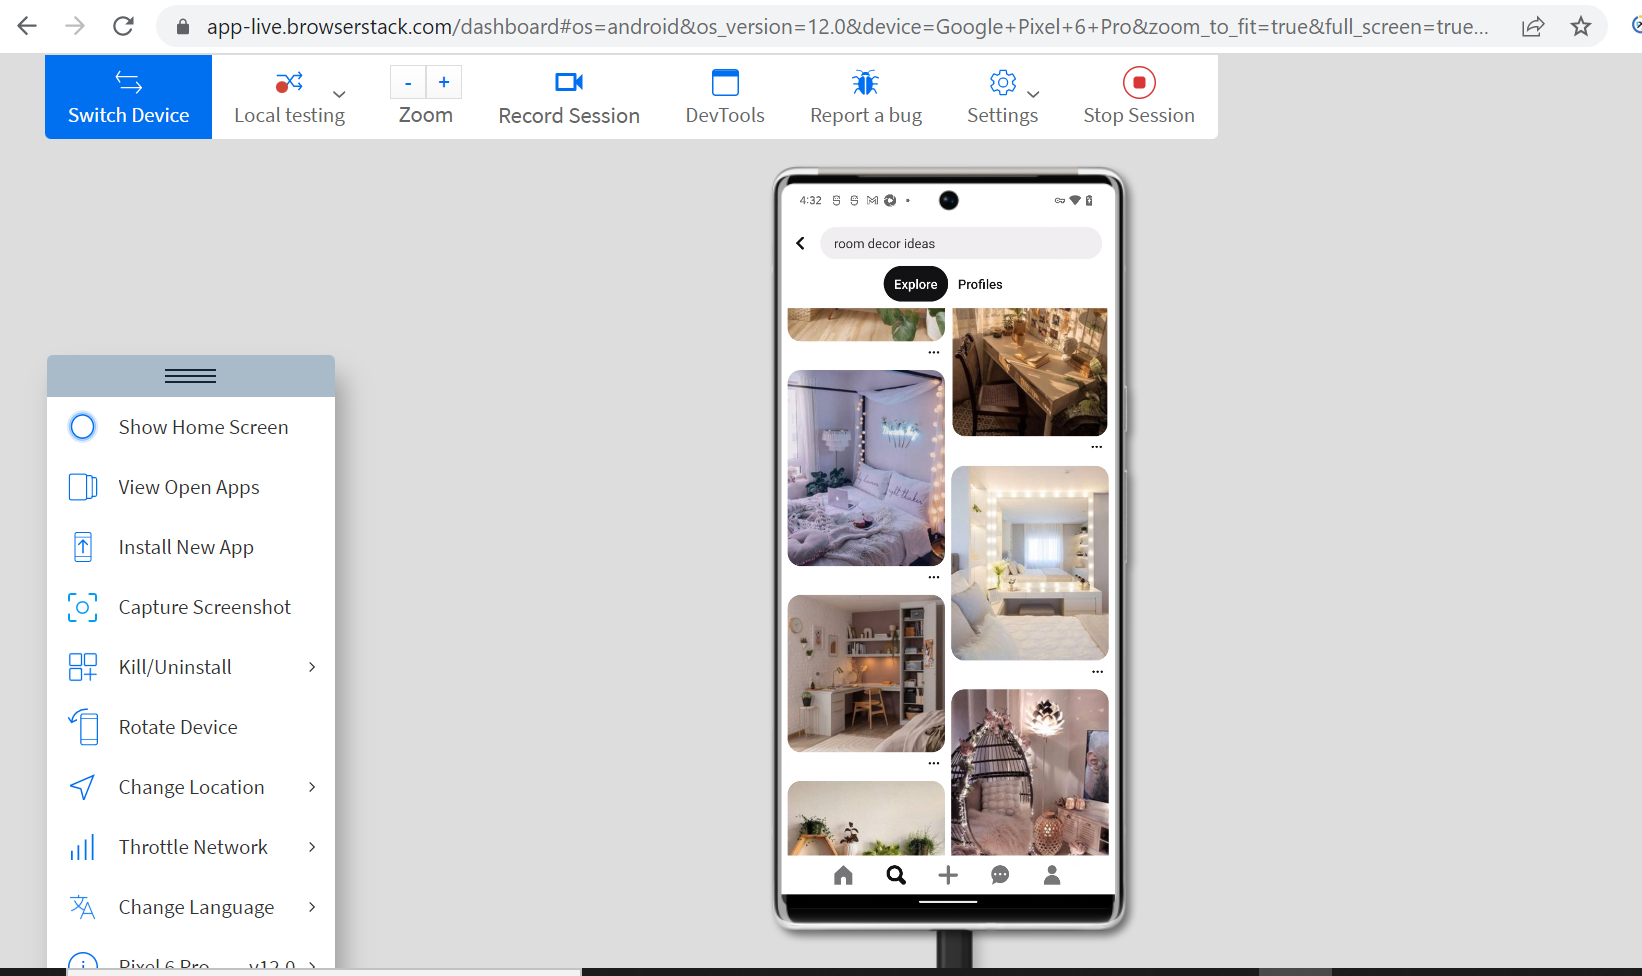 UI Test of React Native App Pinterest on Android Phone